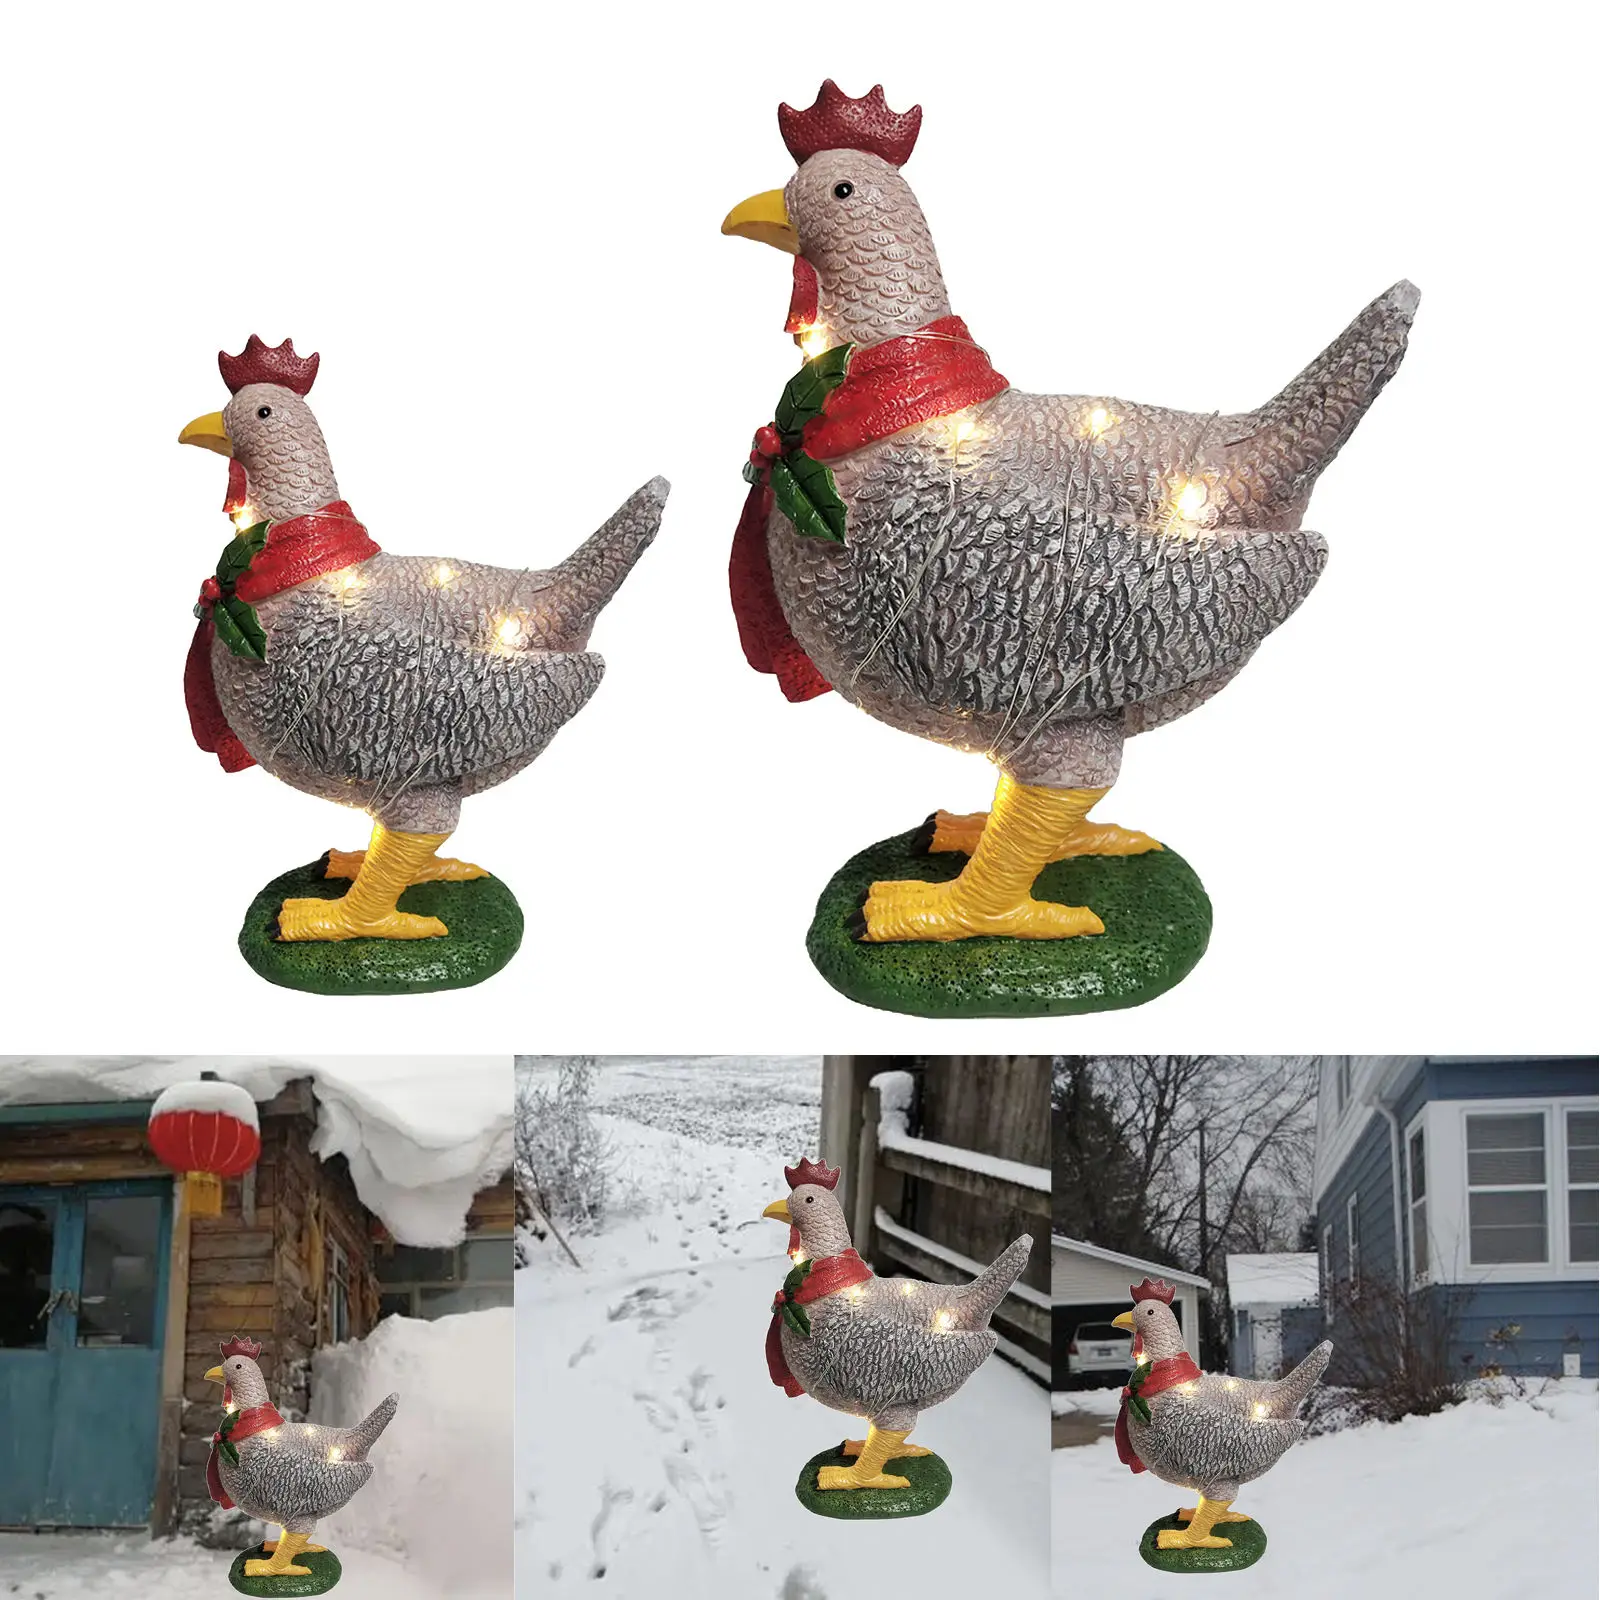 Lantern Chicken Outdoor Christmas Ornaments Light-up Chicken with Scarf for Yard Christmas Gifts